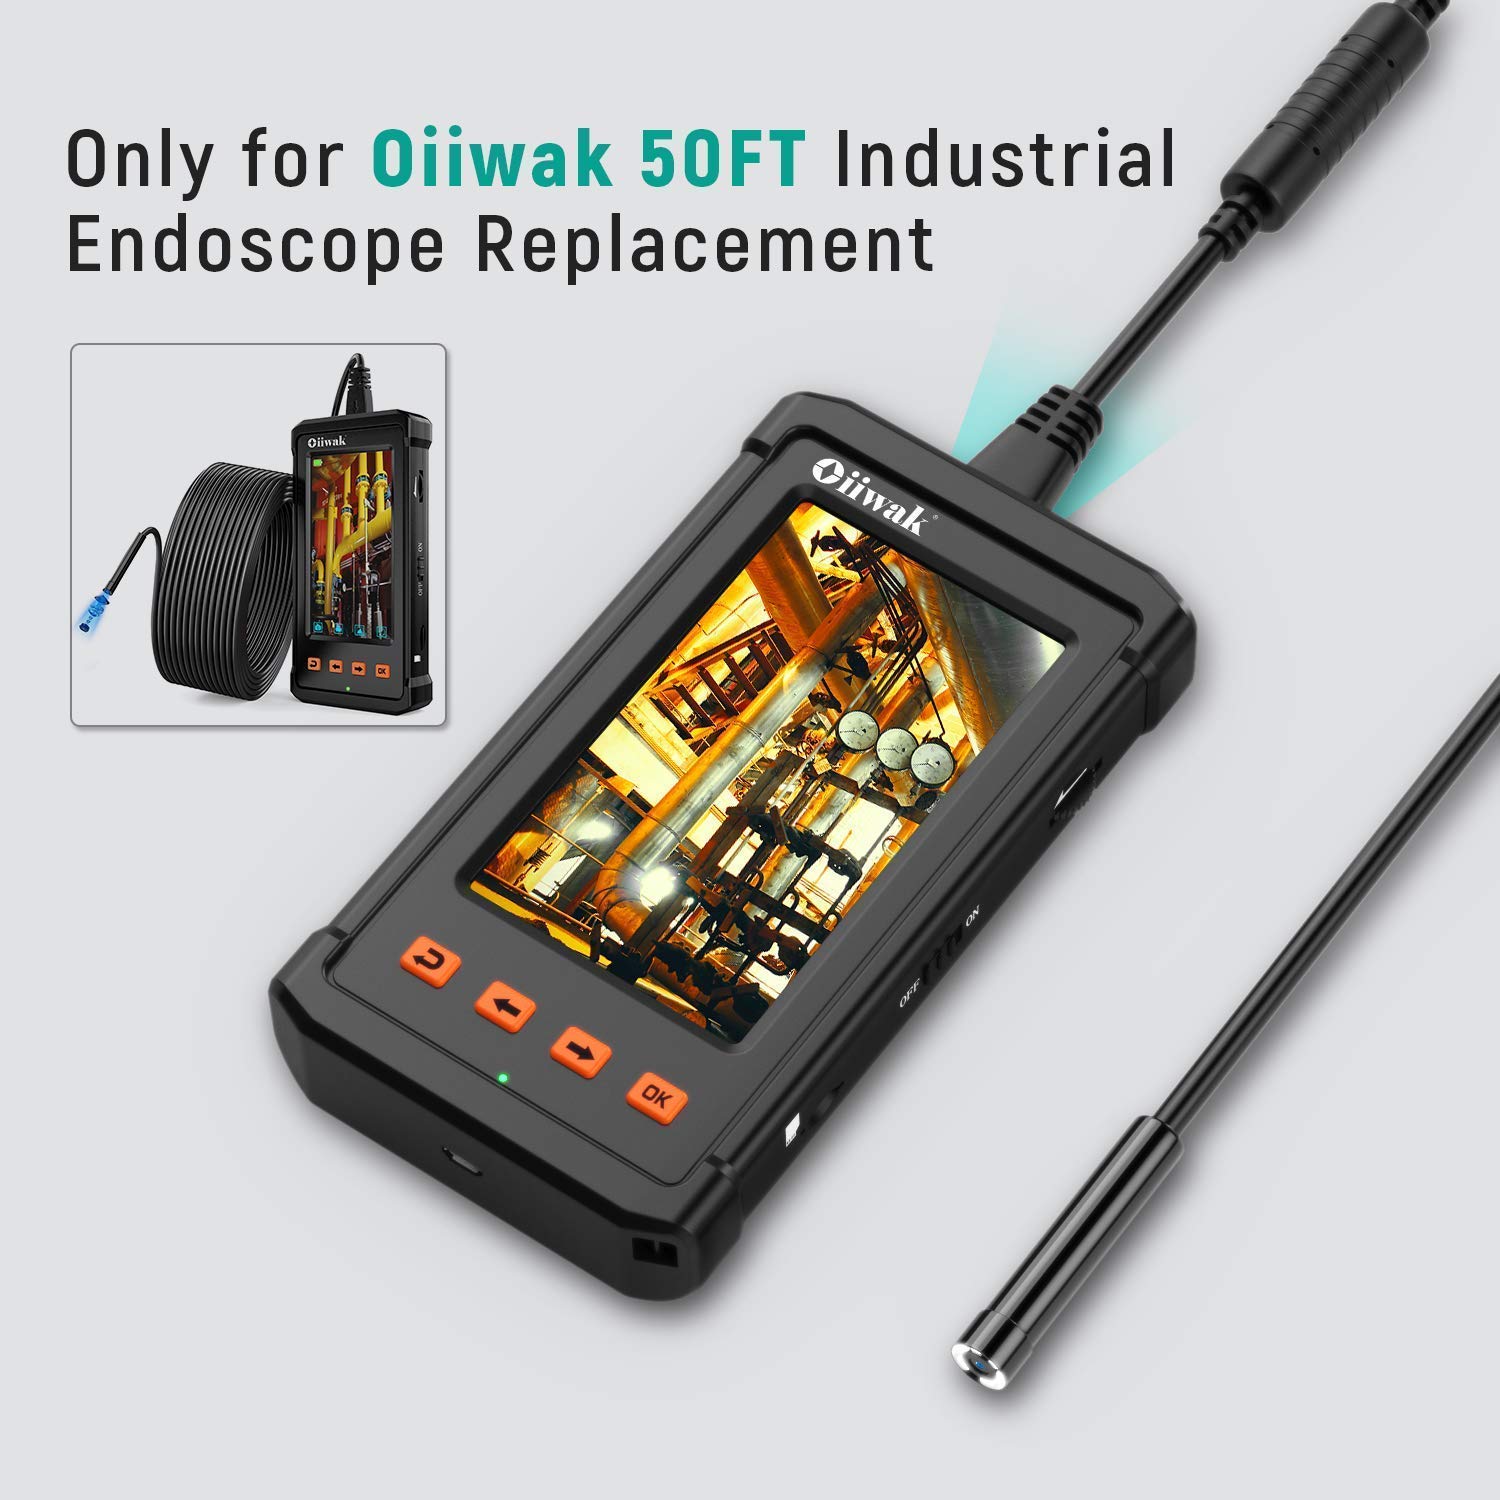 8.5mm  Industrial Endoscope Replacement Cable 15m for 4.3inch IPS screen 15m(50ft) industrial endoscope